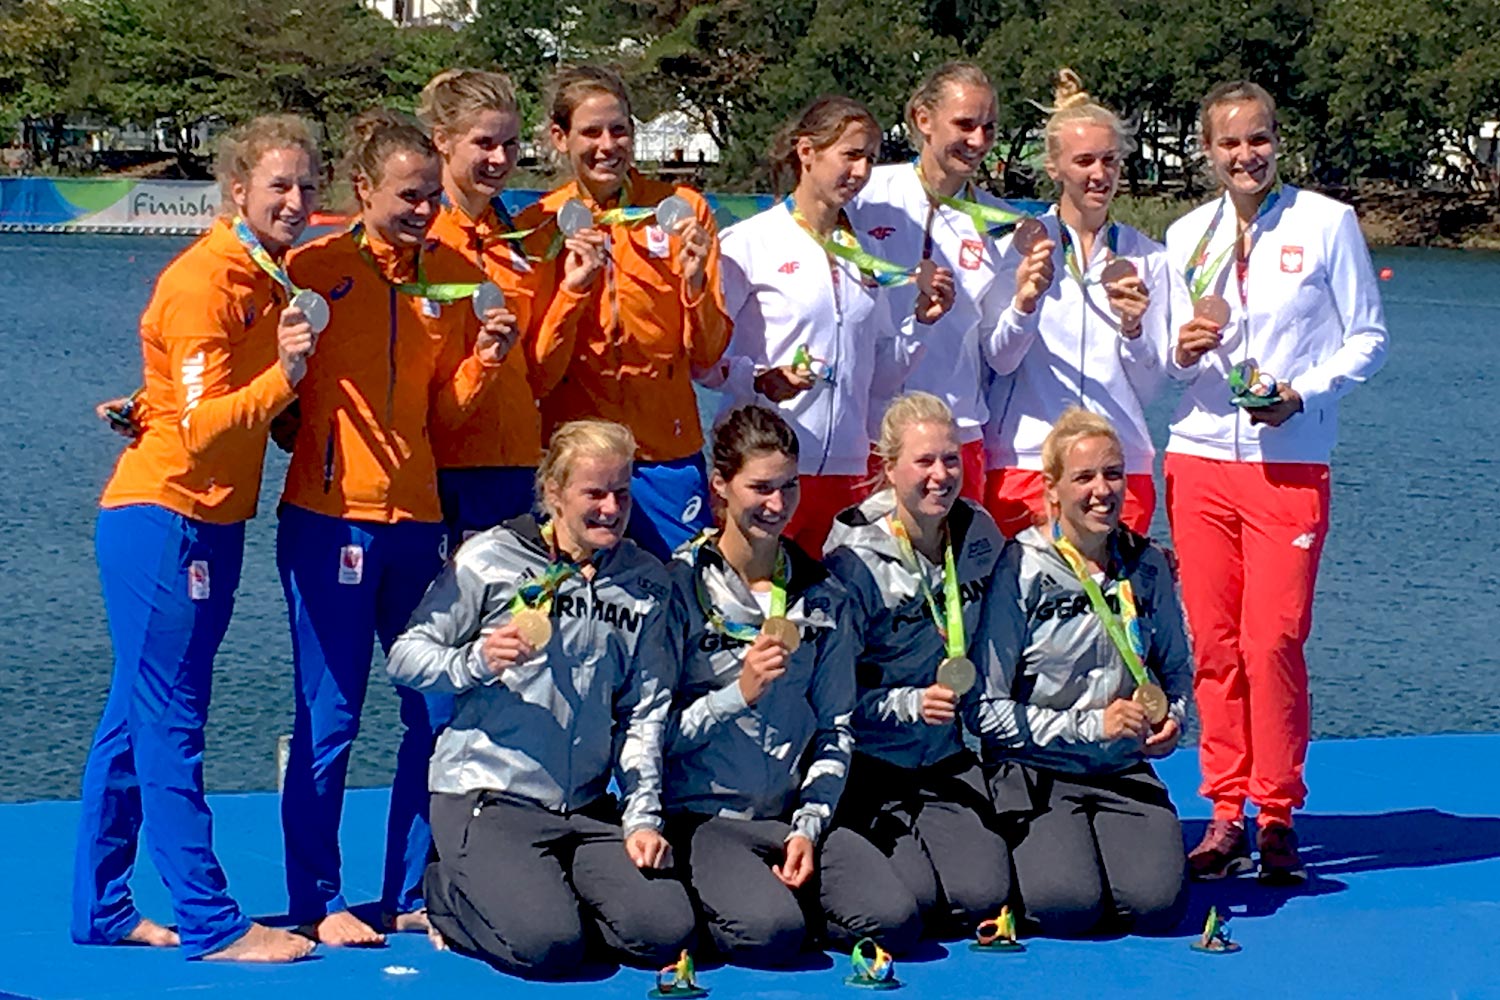 UVA alumna Inge Janssen, third from left on the top row, is part of the Dutch quadruple sculls team that captured a silver medal Thursday morning.